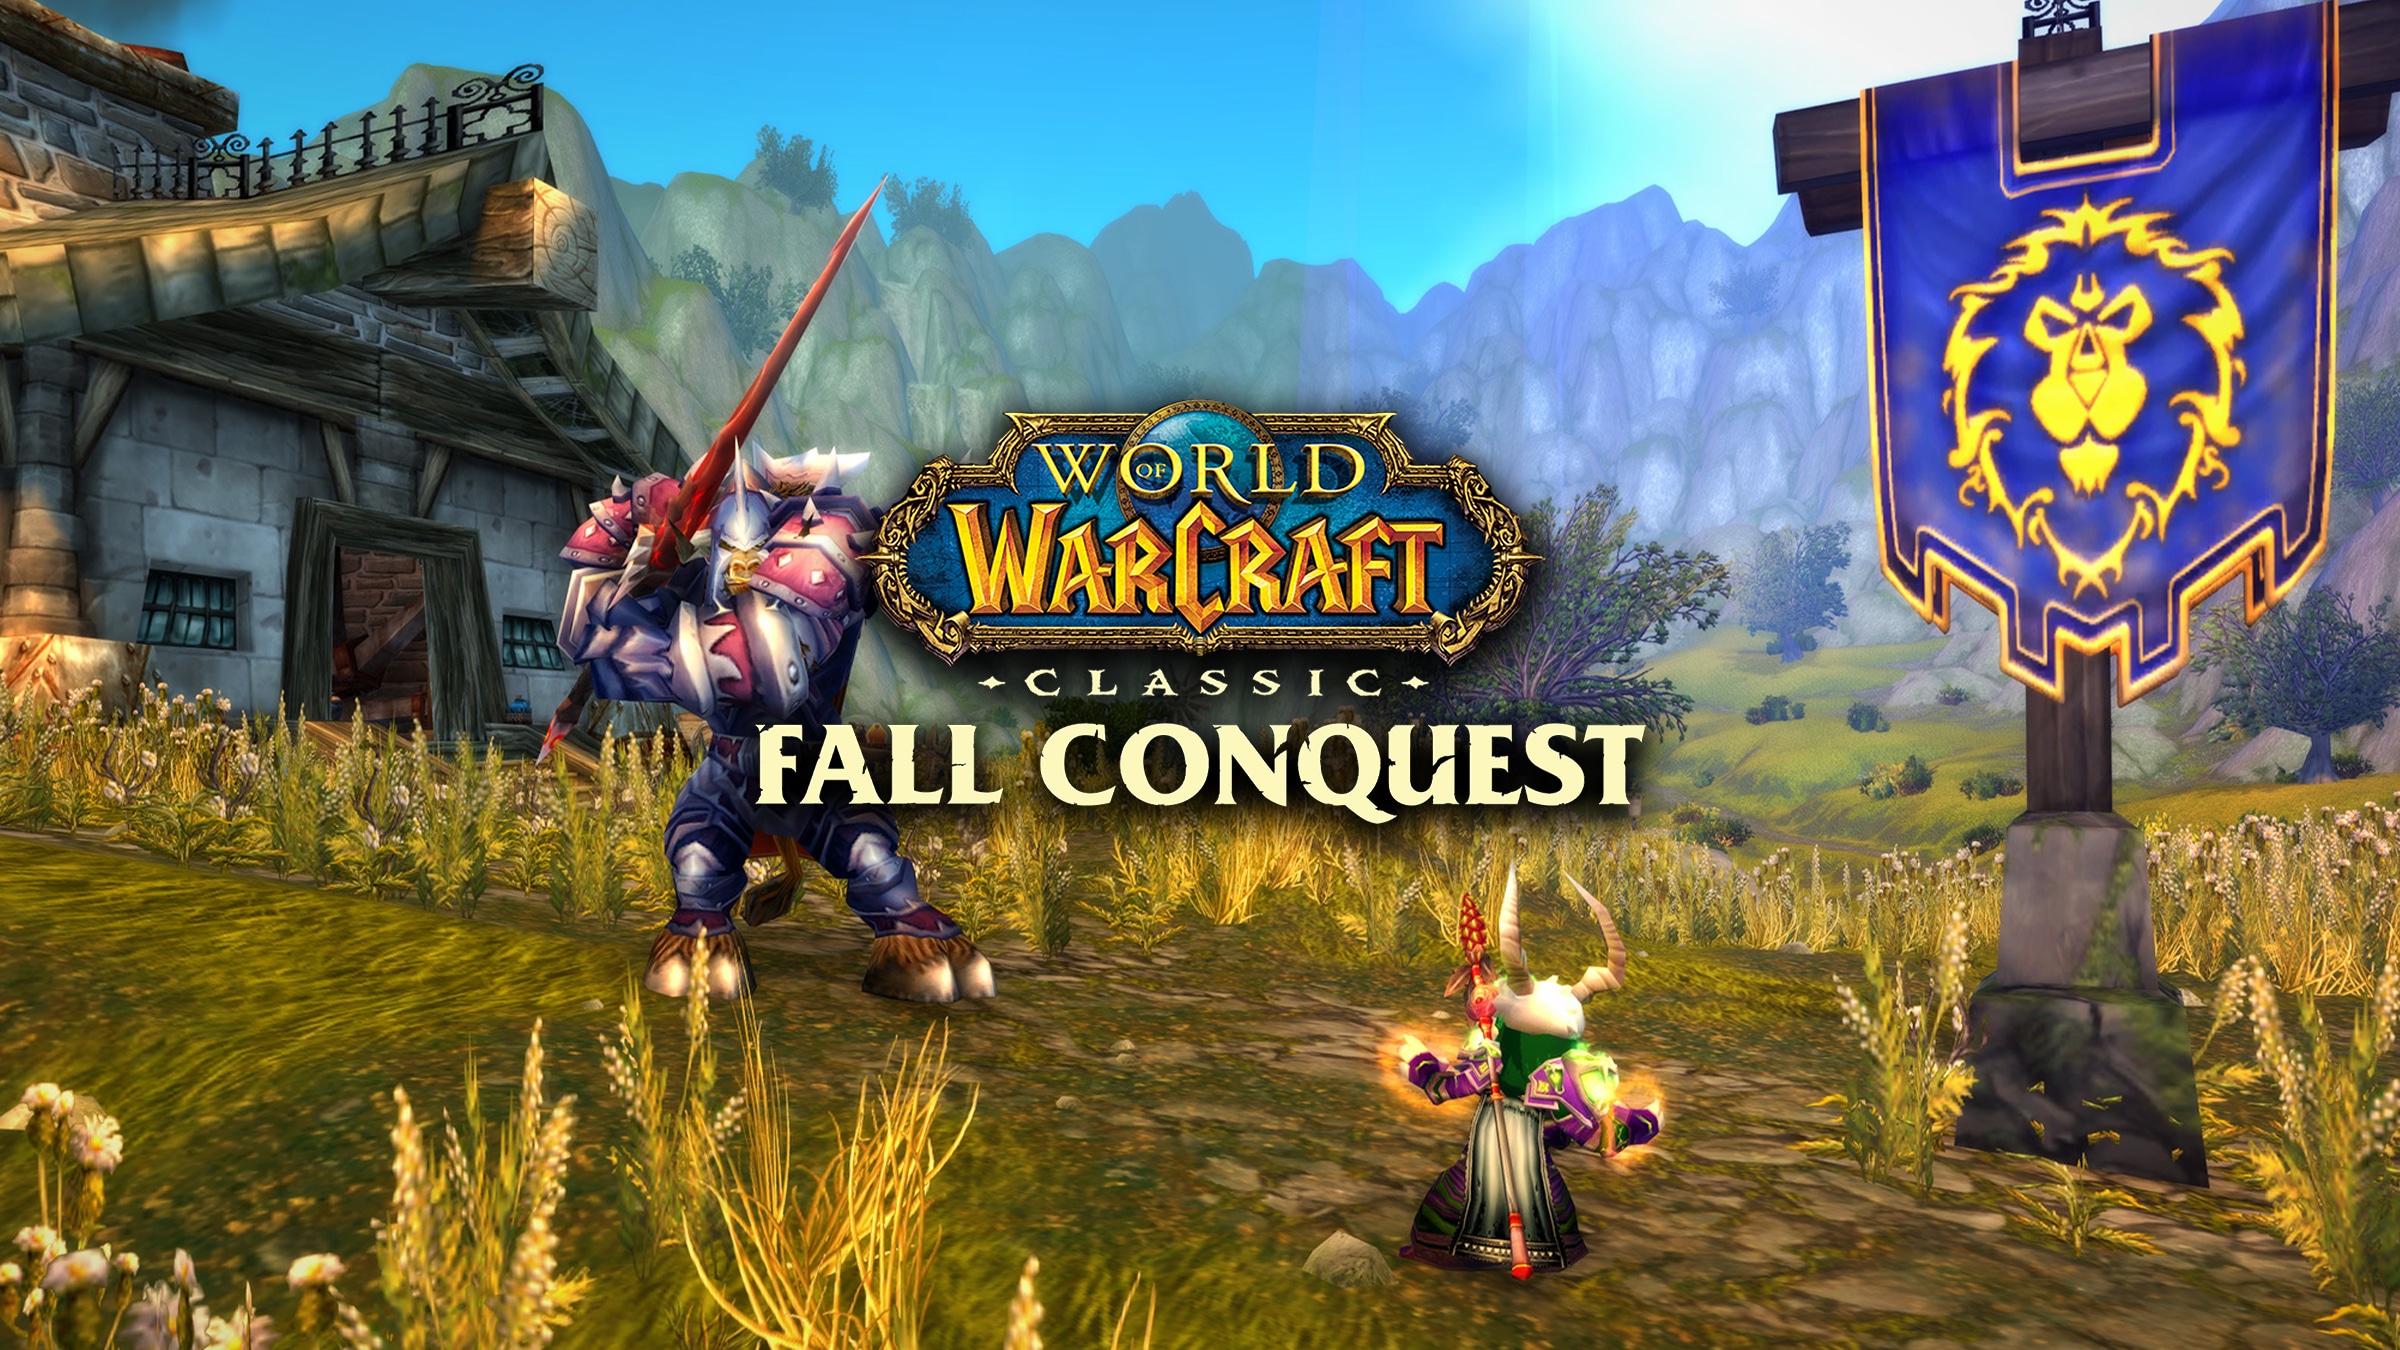 Introducing the World of Warcraft Classic Fall Conquest - World of Warcraft  - Battle.net News